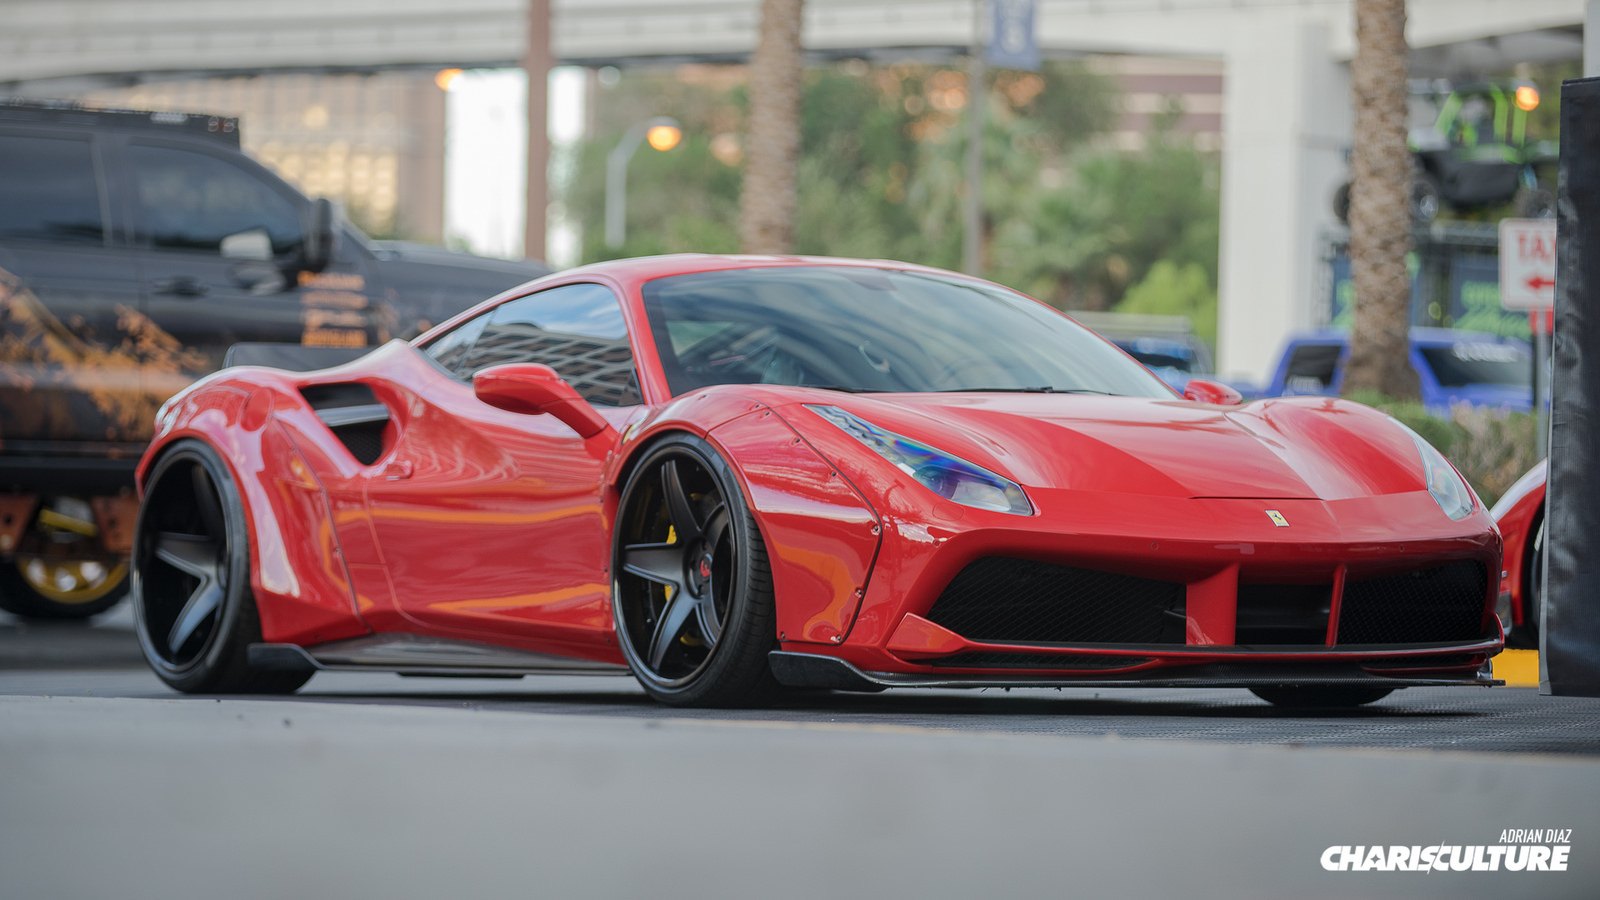 Carbon Fiber Front Lip on Red Ferrari 488 - Photo by The Charis Culture